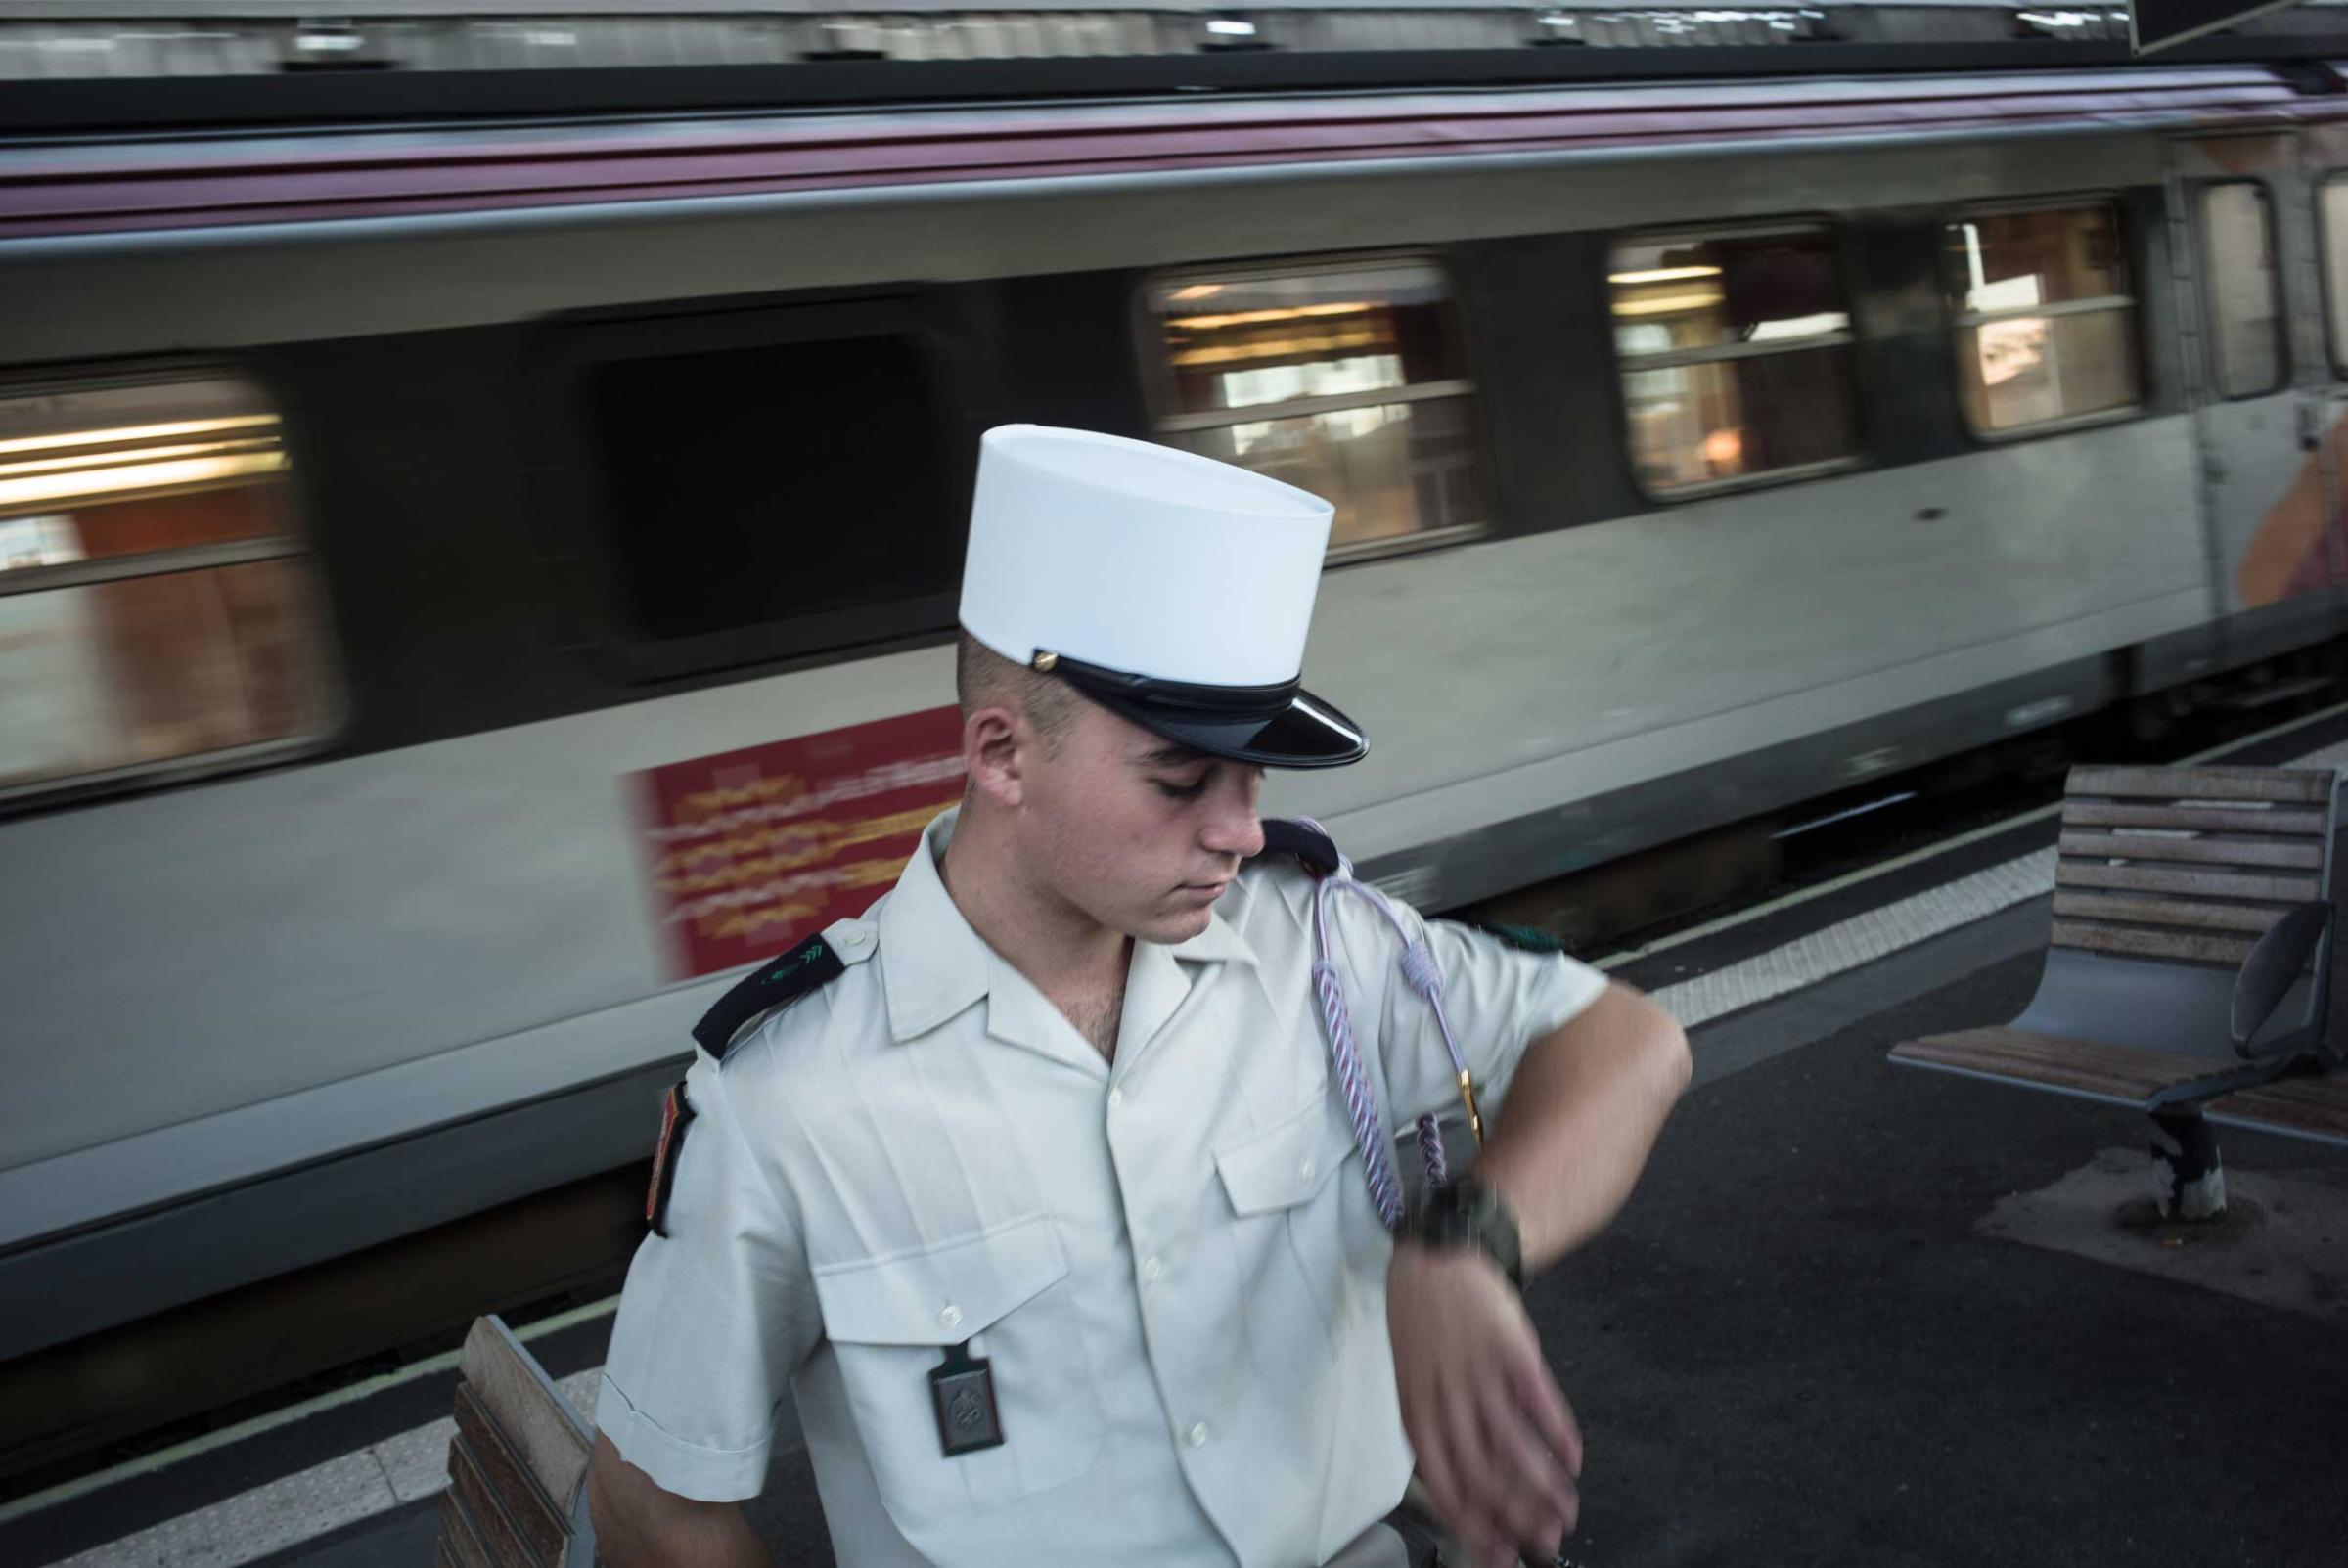 A young French Legionnaire is waiting for a train to go home near Marseille. Regulations forbid him from leaving Nimes, and the week after this photograph was taken, he was caught by an officer who was also waiting at the station. Nimes, France. Aug. 14, 2015.